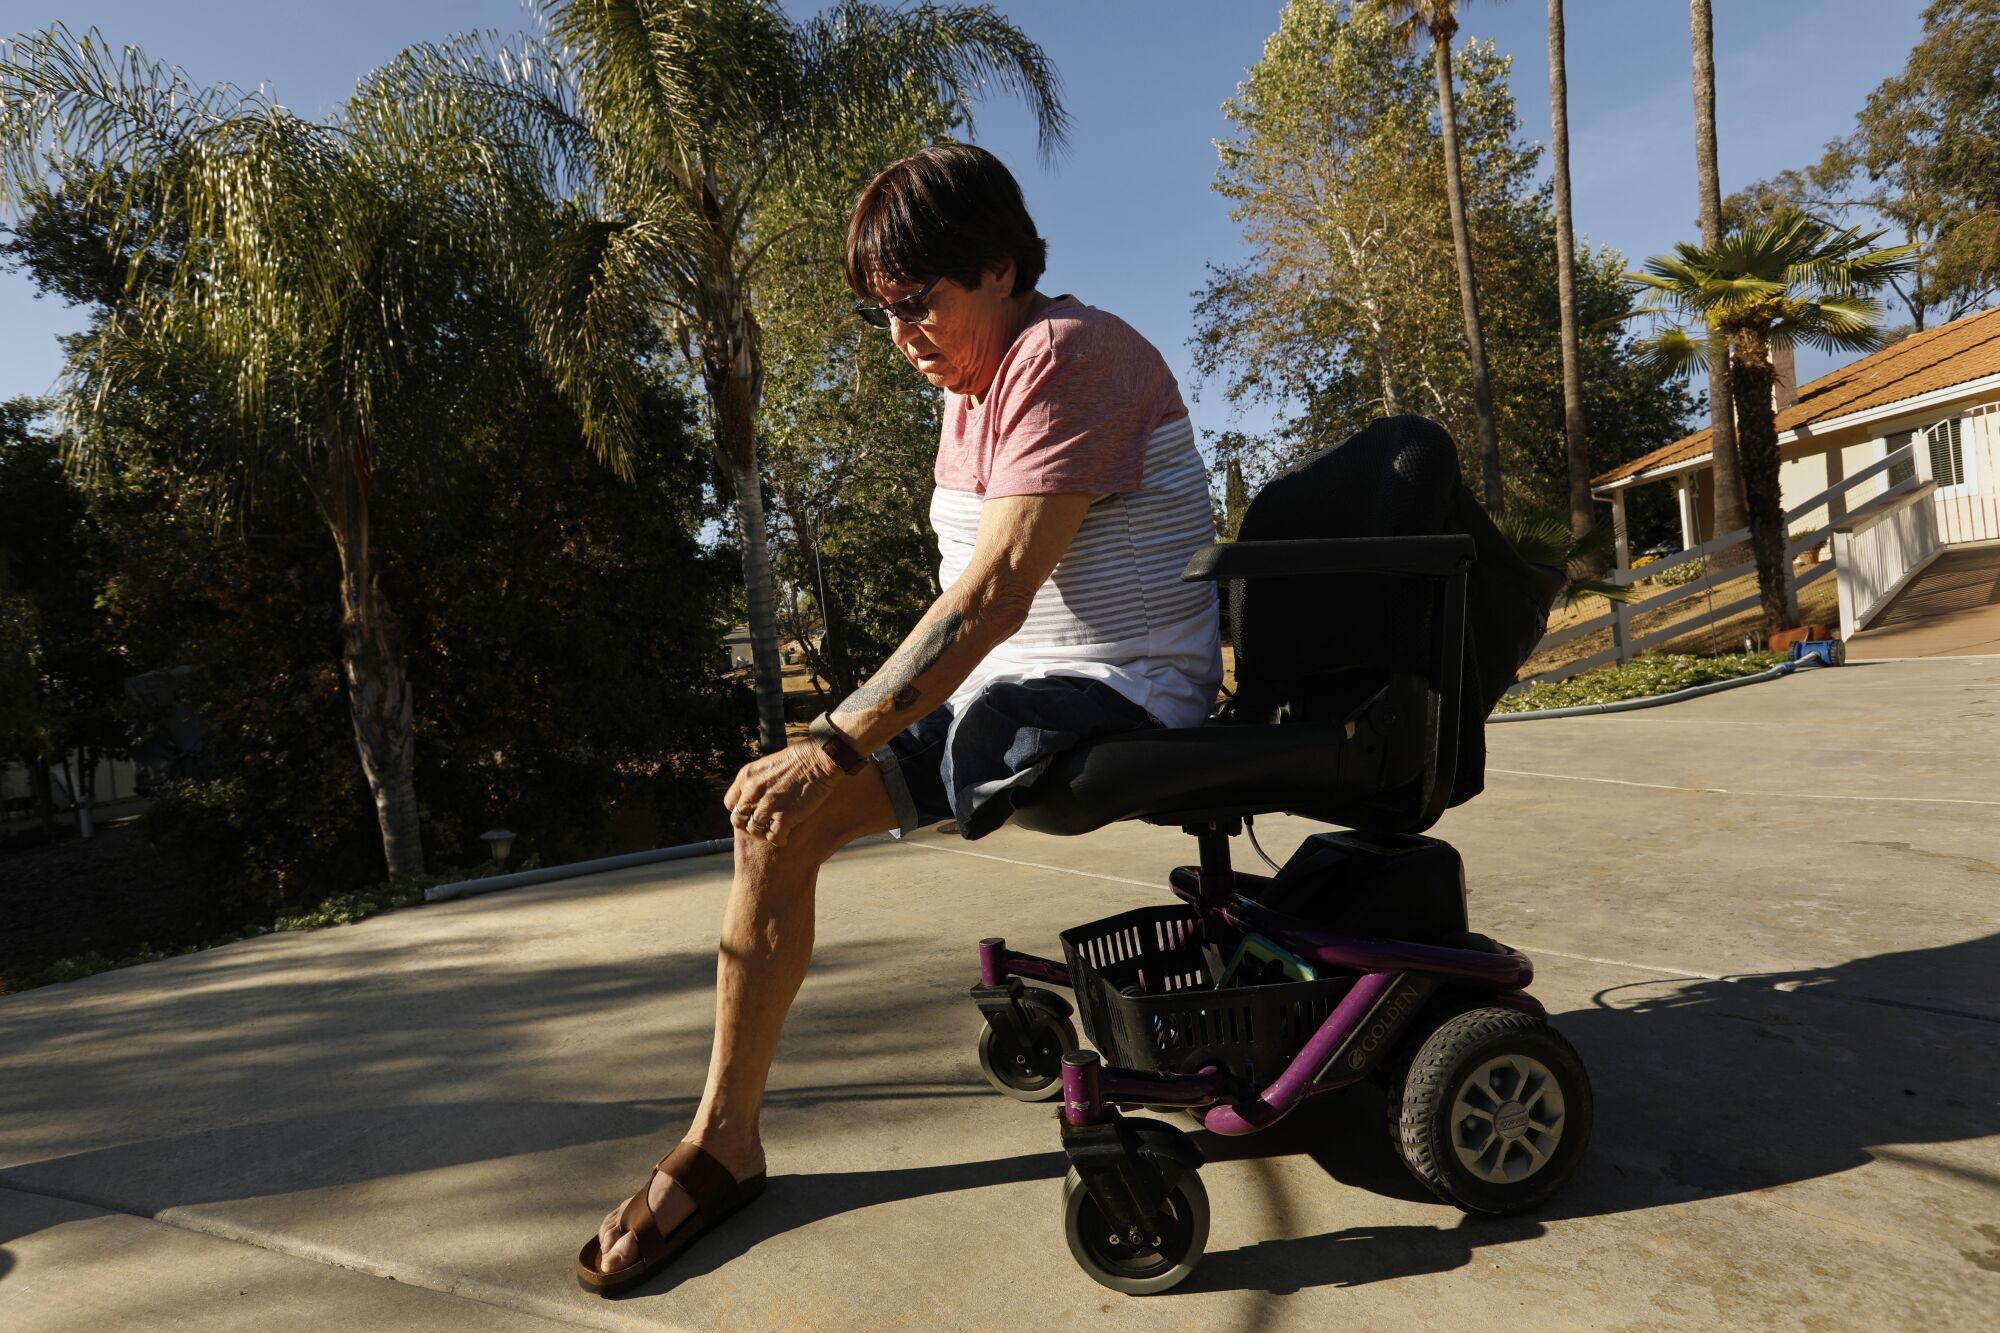 A woman whose leg has been amputated sits on a motorized wheelchair outdoors